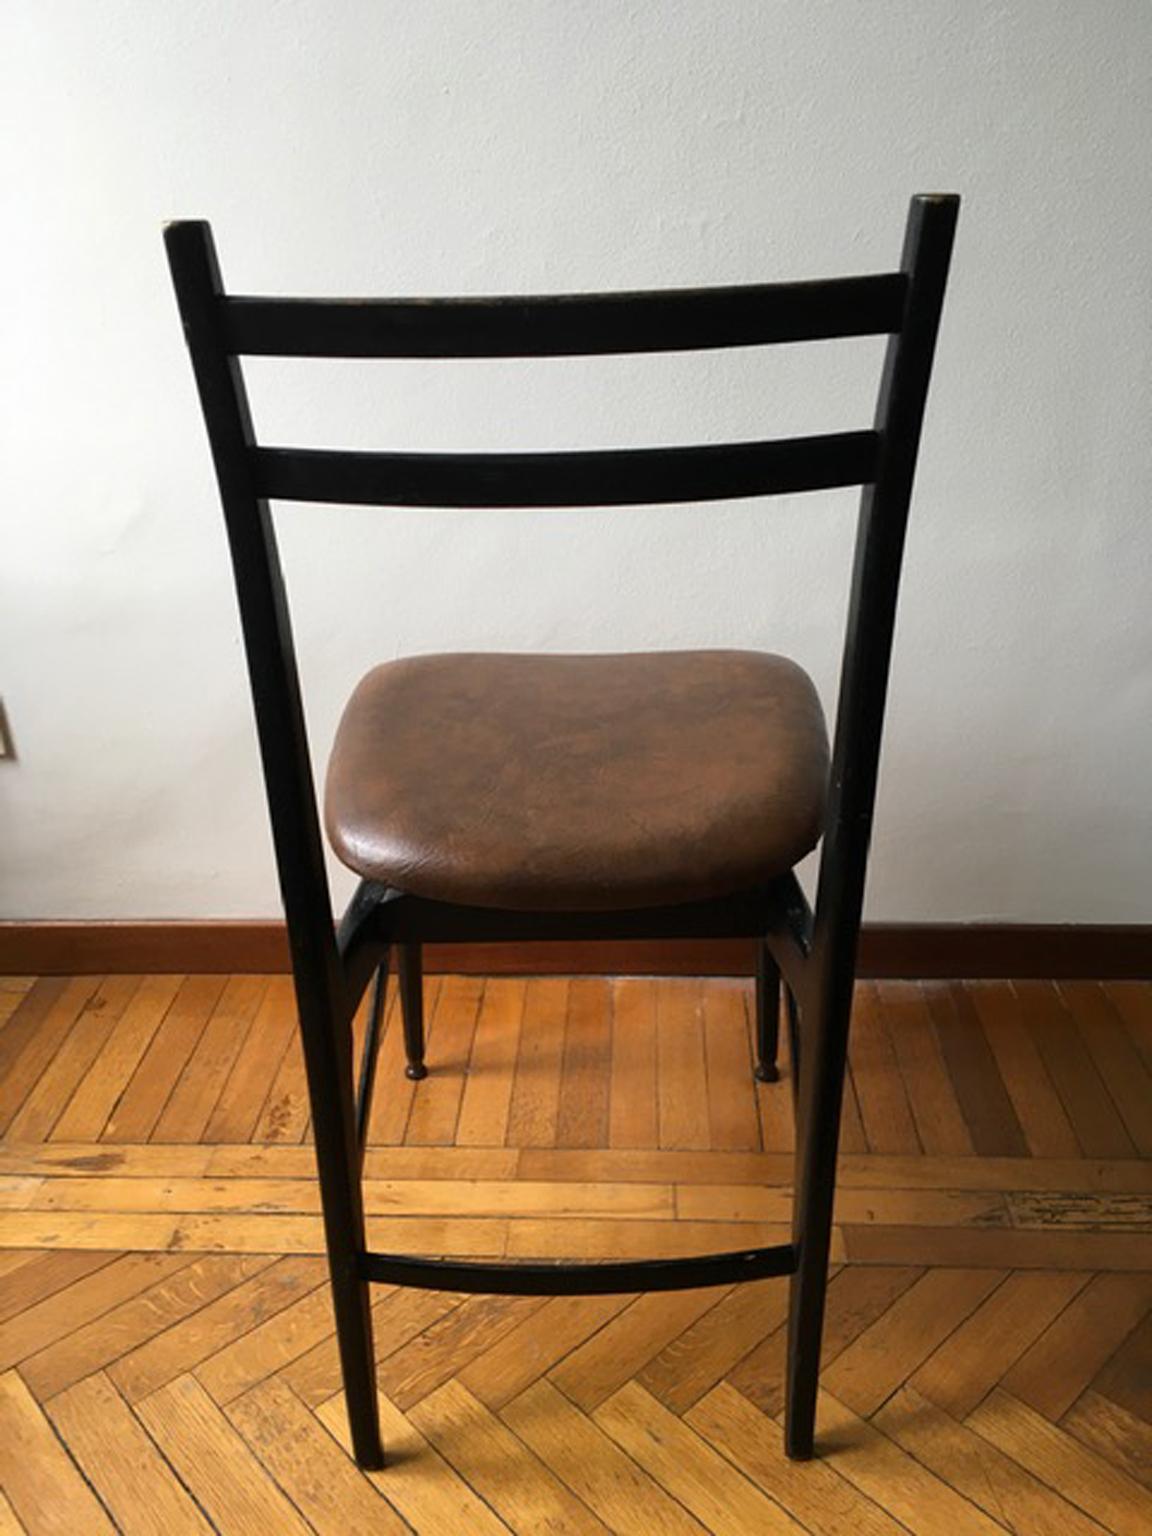 20th Century Italy Post-Modern Design Black Wooden Chair For Sale